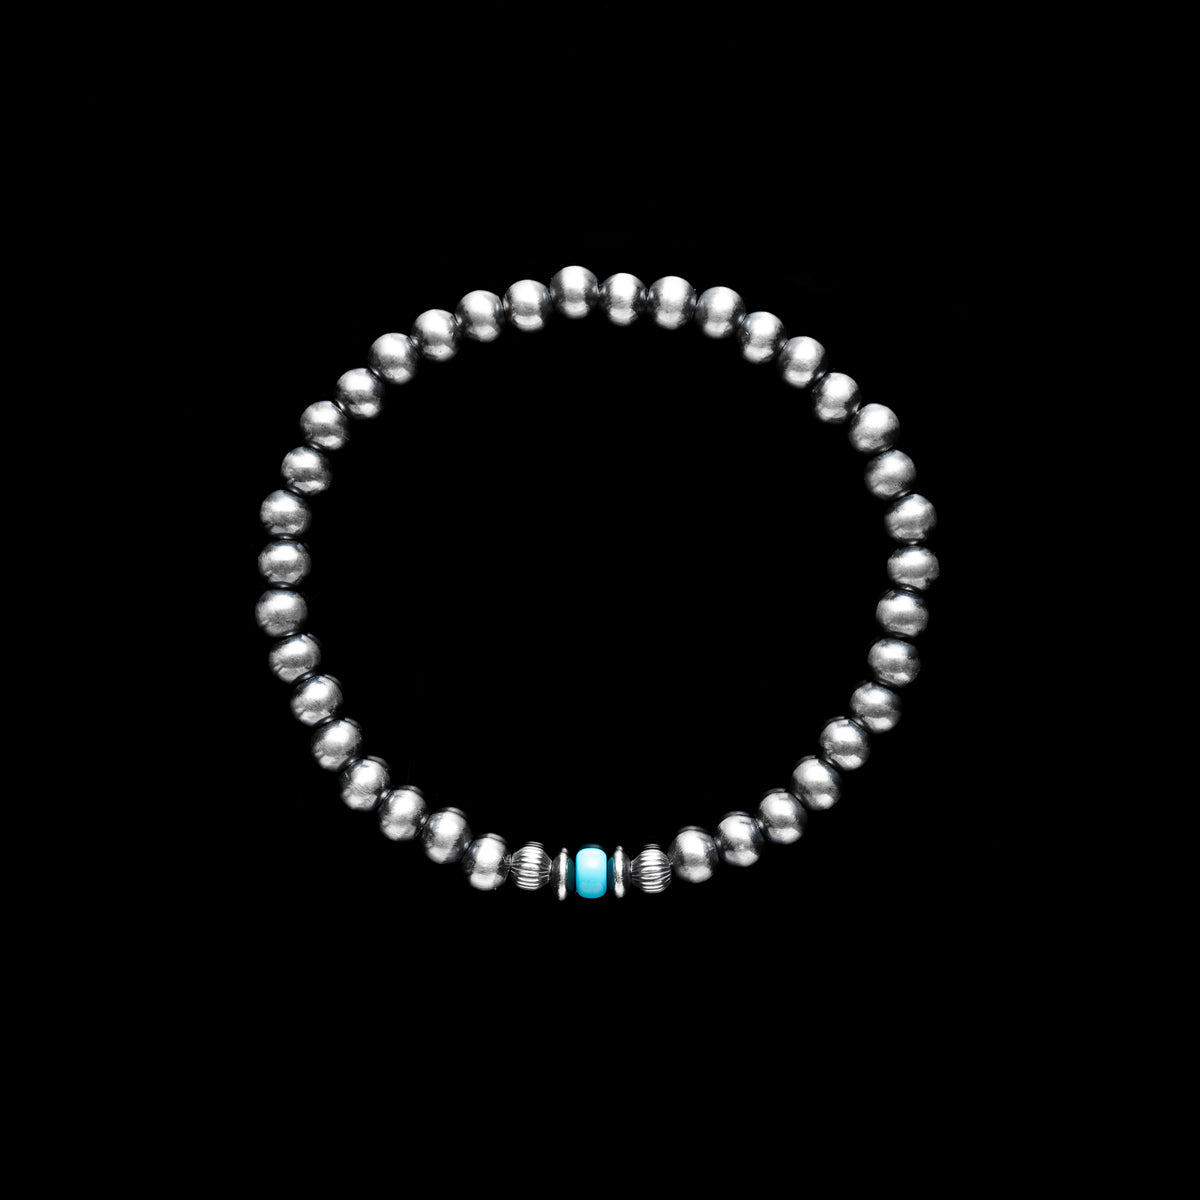 5mm Santa Fe Pearl Stretch Bracelet with Turquoise Accent Rondelle Bead